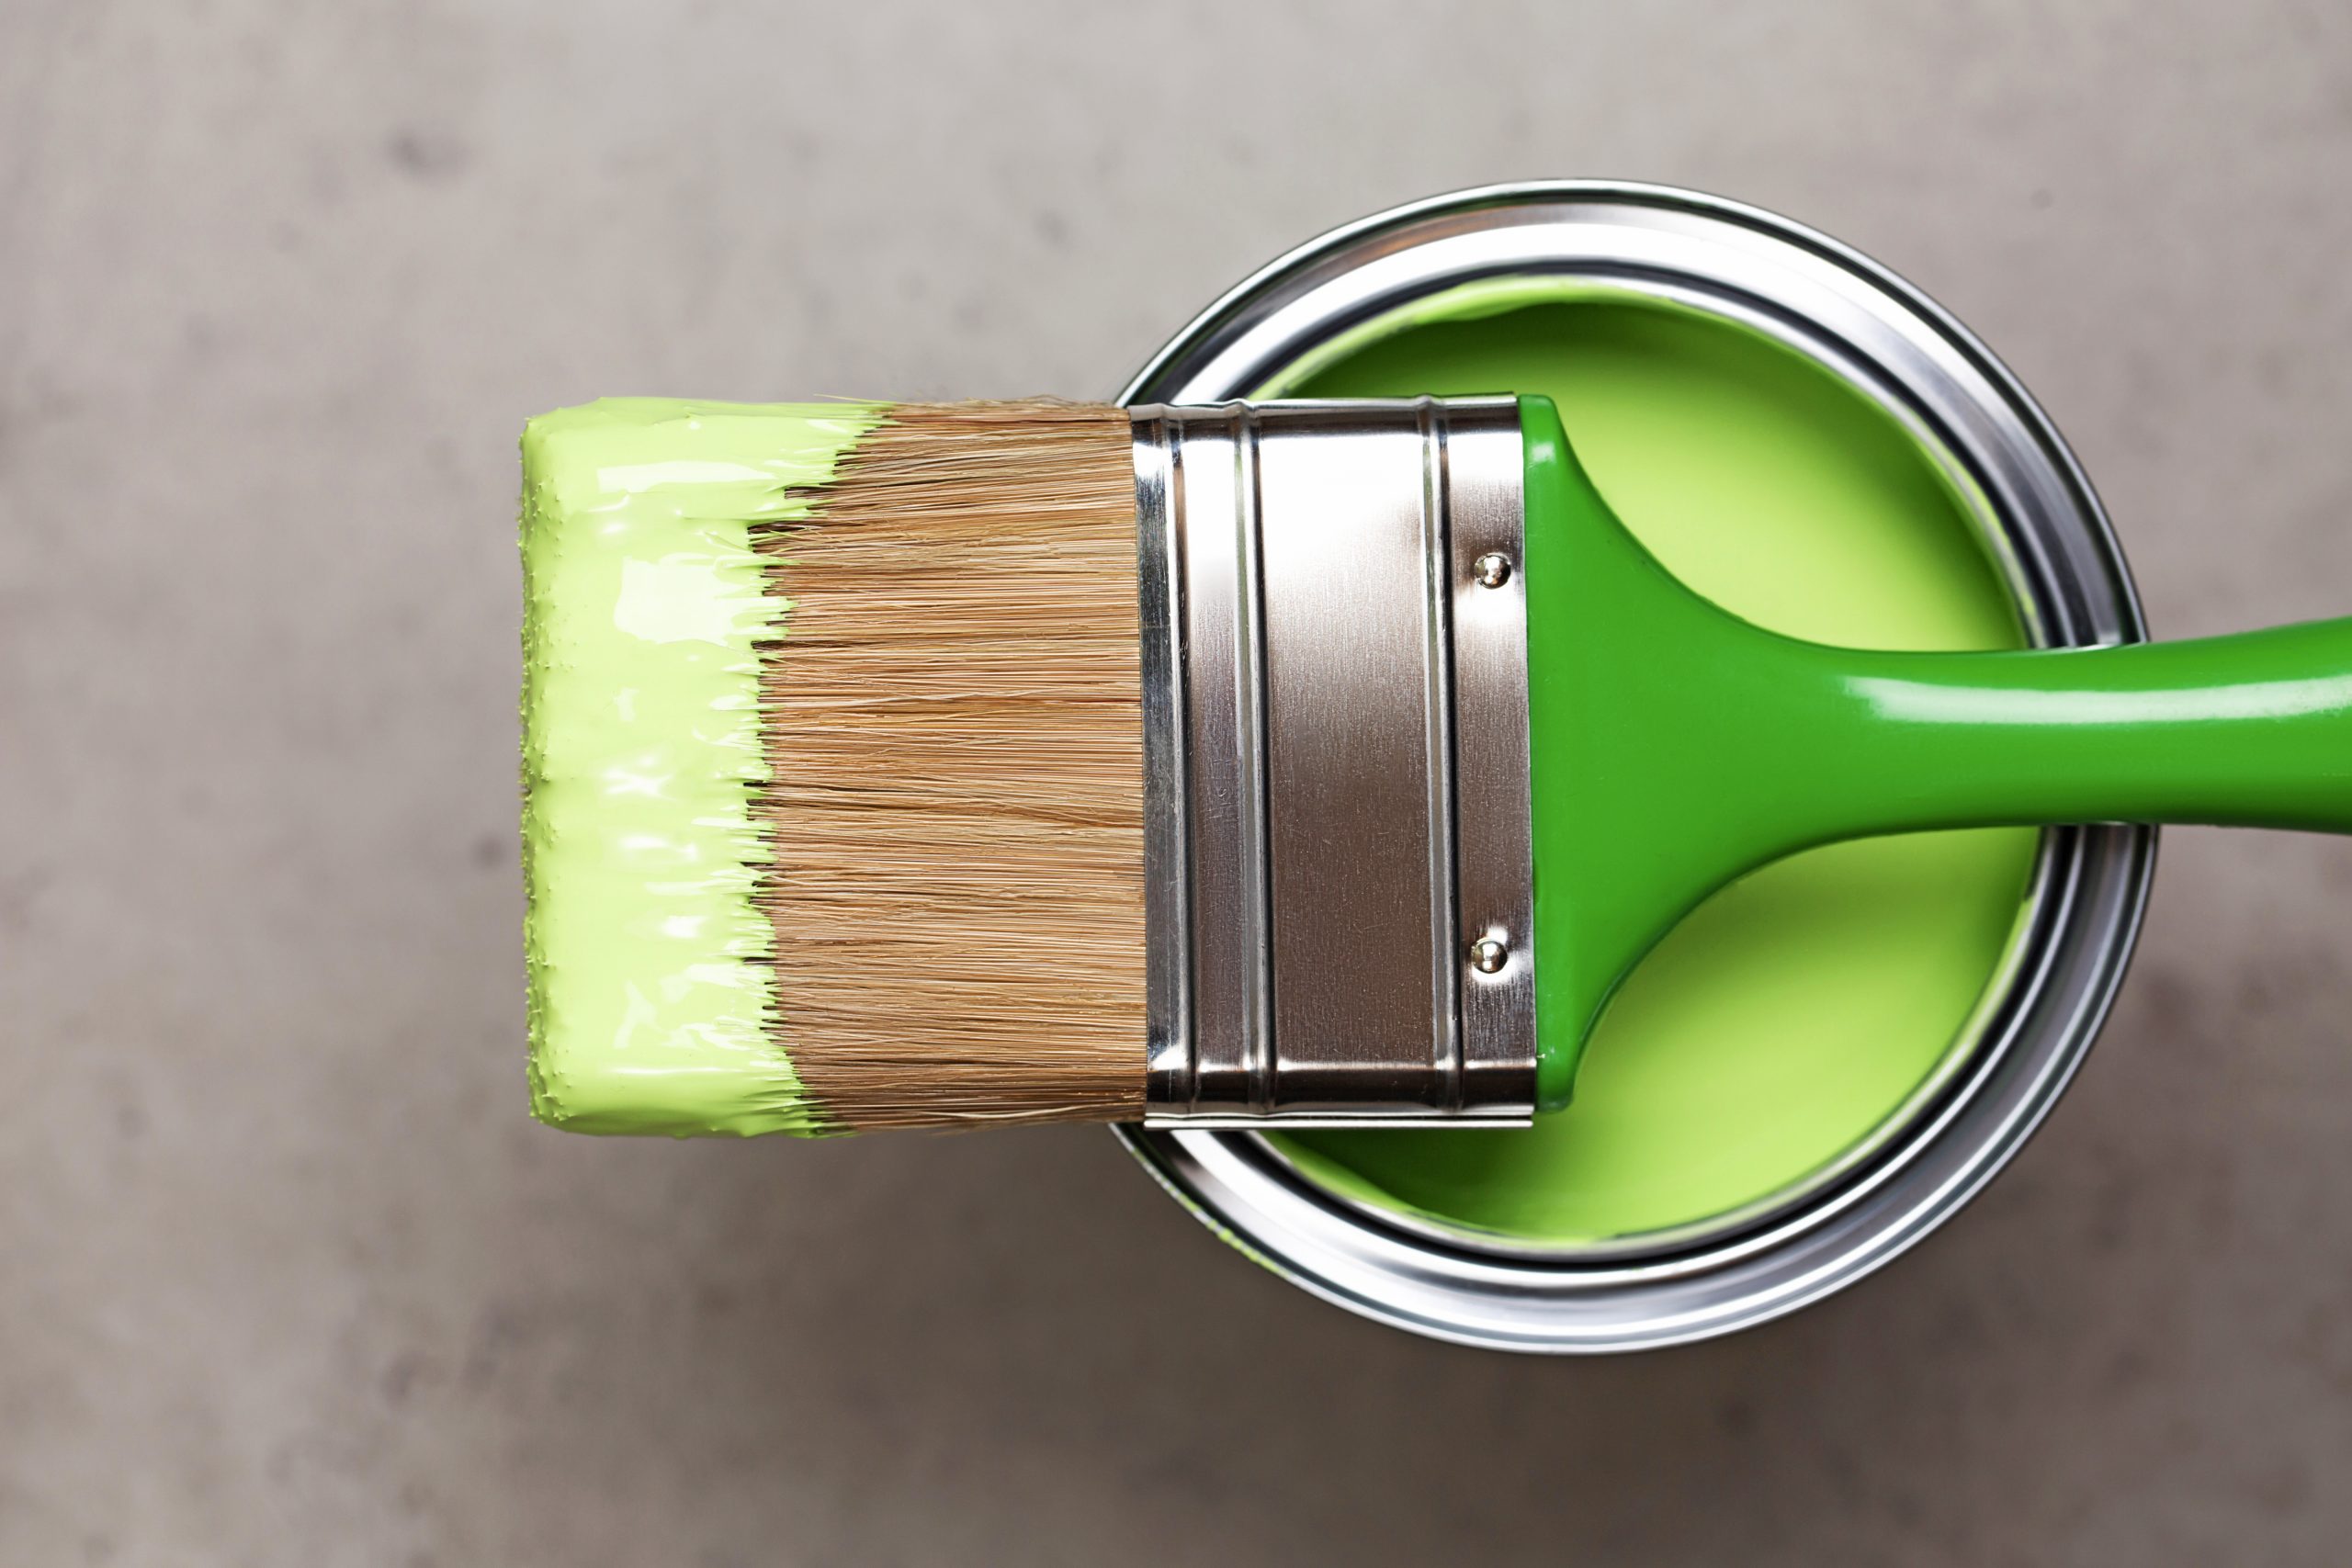 Paintbrush on metal bucket with green pigment for renovation works on concrete gray background. Redecoration concept in home interior. Flat lay style and close-up